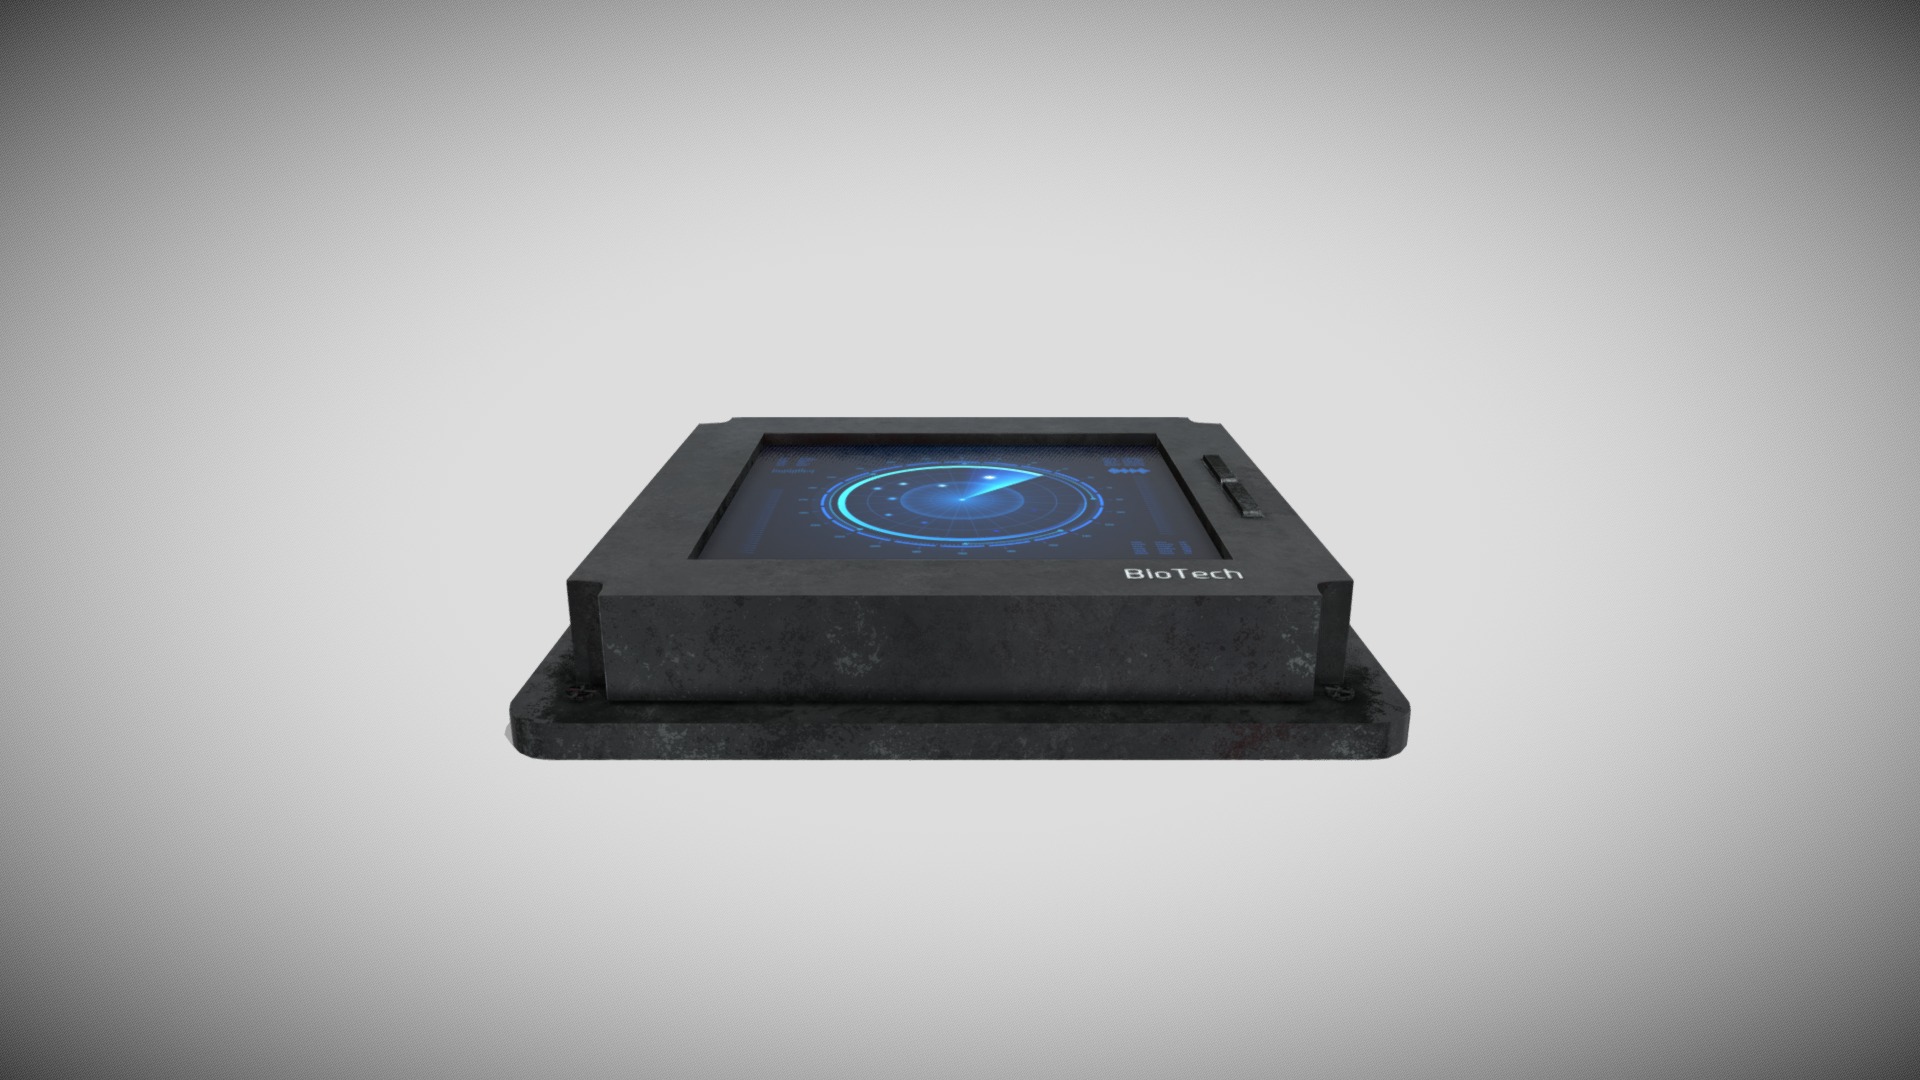 3D model Sci-fi  Element - This is a 3D model of the Sci-fi  Element. The 3D model is about a black rectangular object with a blue circle on it.